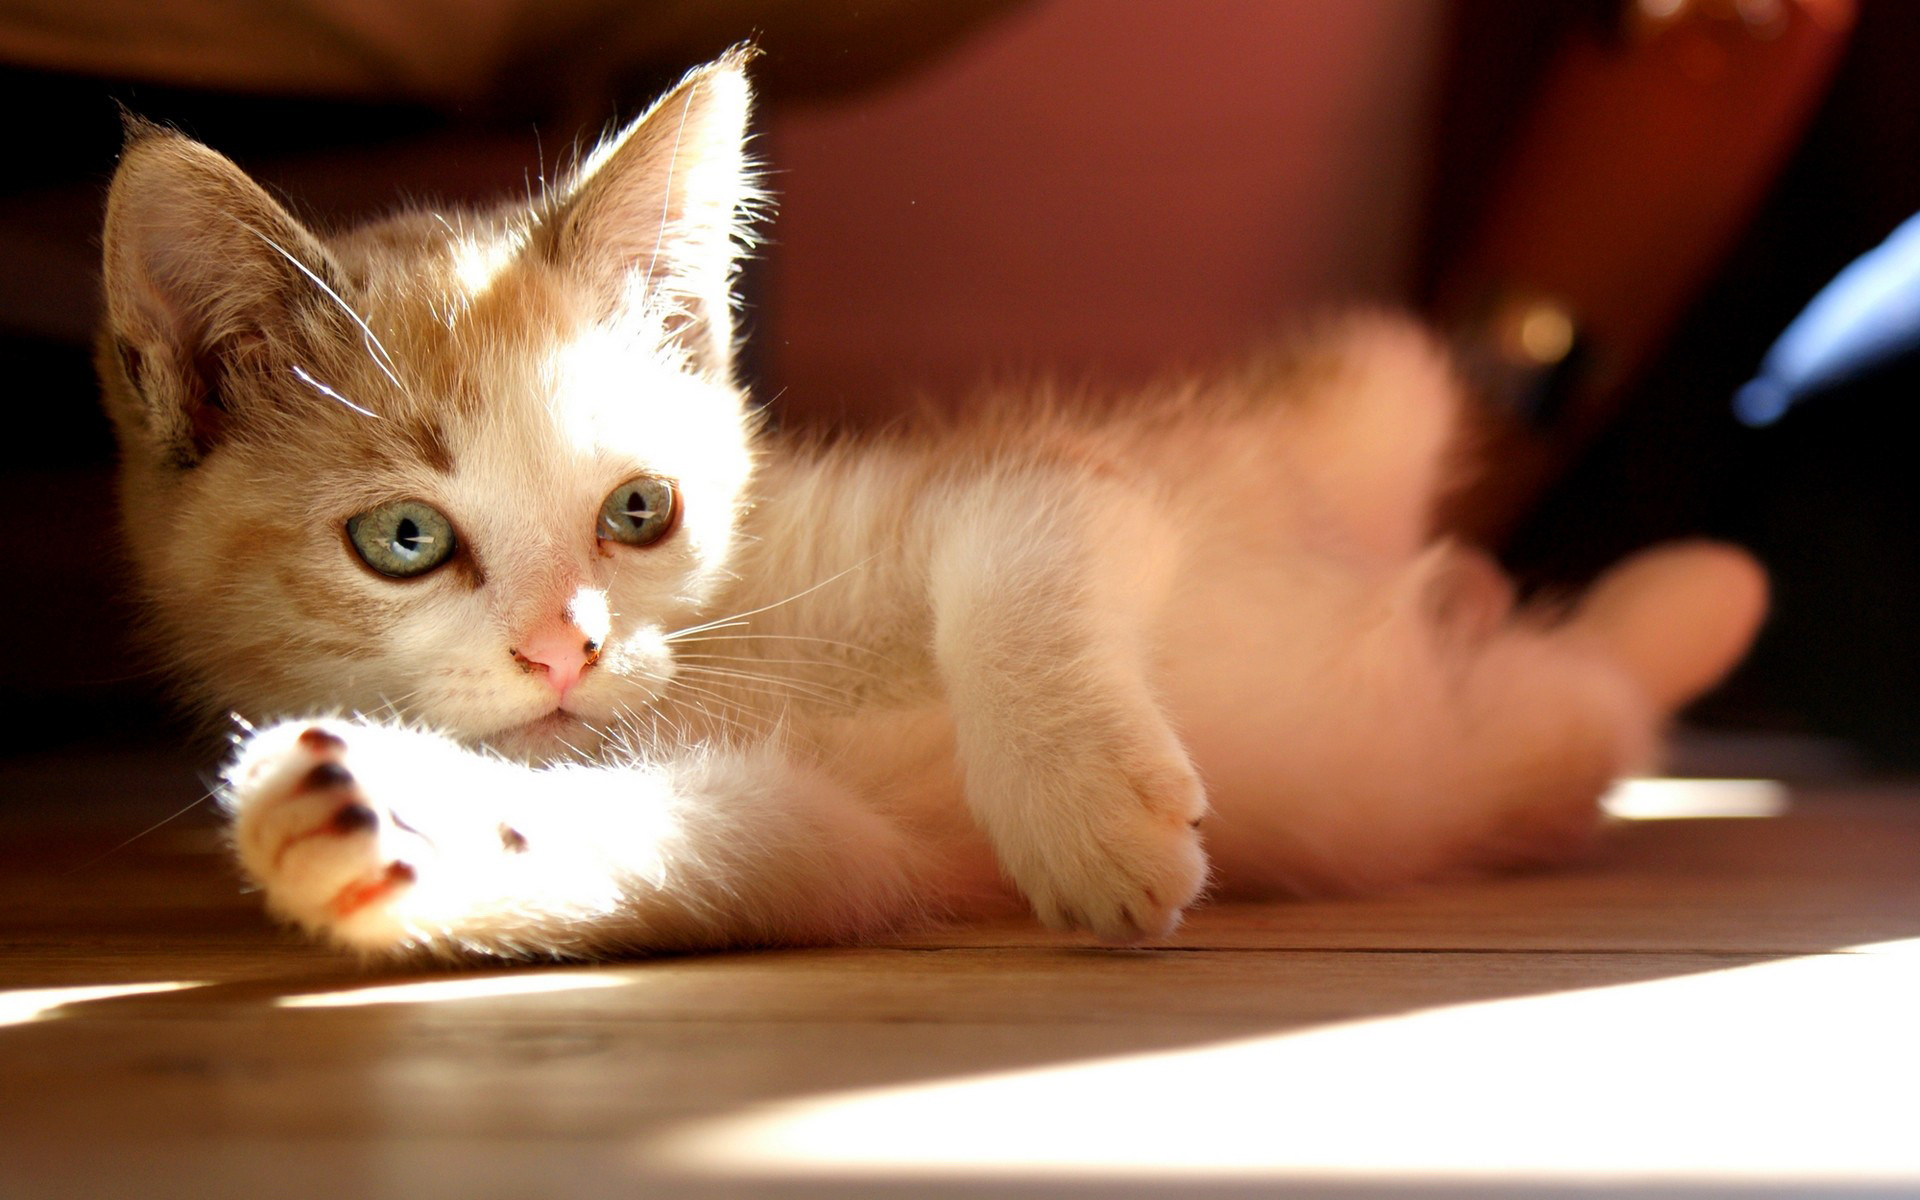 animals, Cats, Kittens, Cute, Babies, Face, Eyes, Whiskers, Paws, Light, Sunlight, Ray, Shade, Play Wallpaper